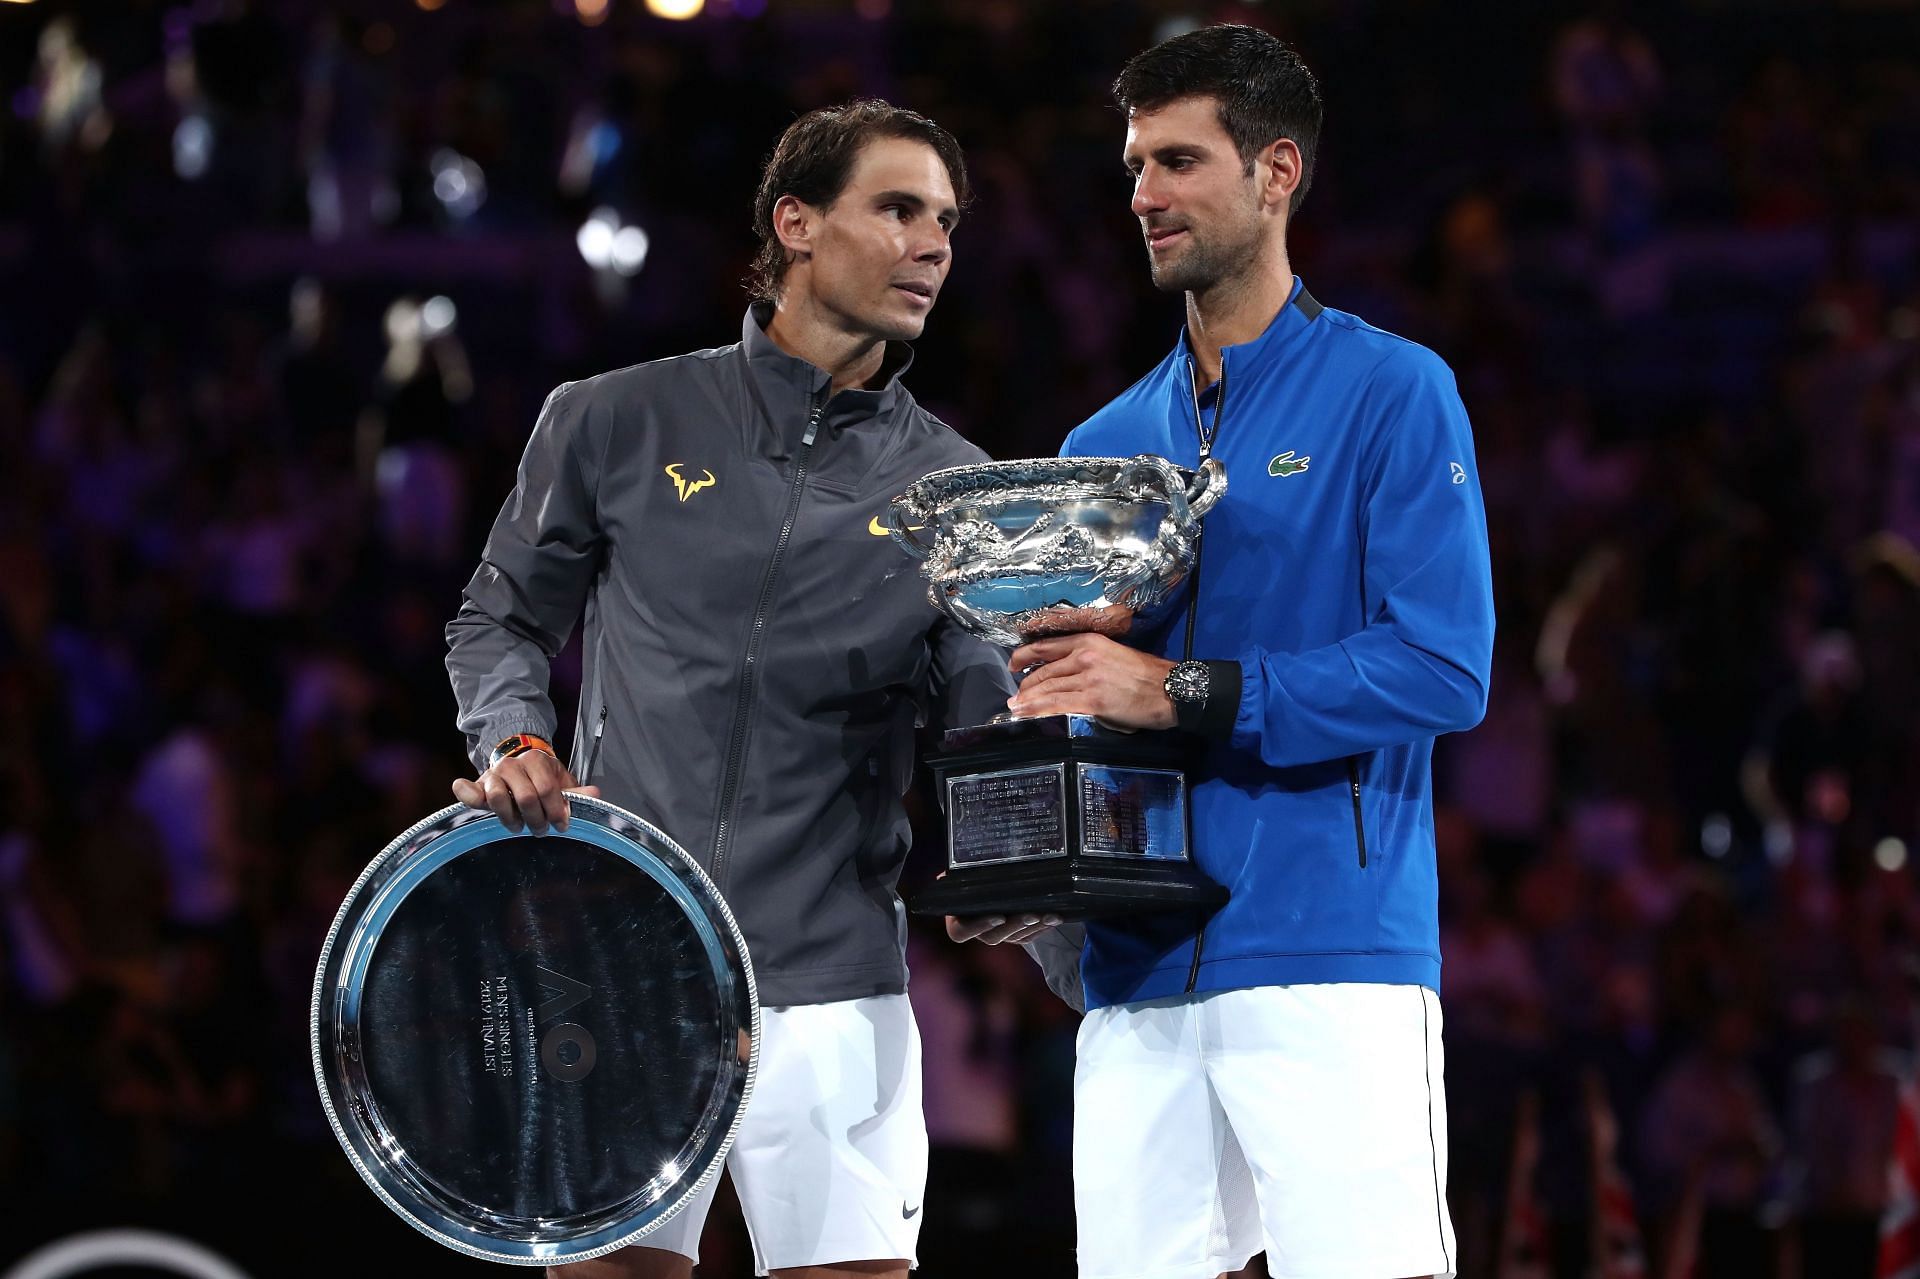 Djokovic could meet Nadal (left) in the final.